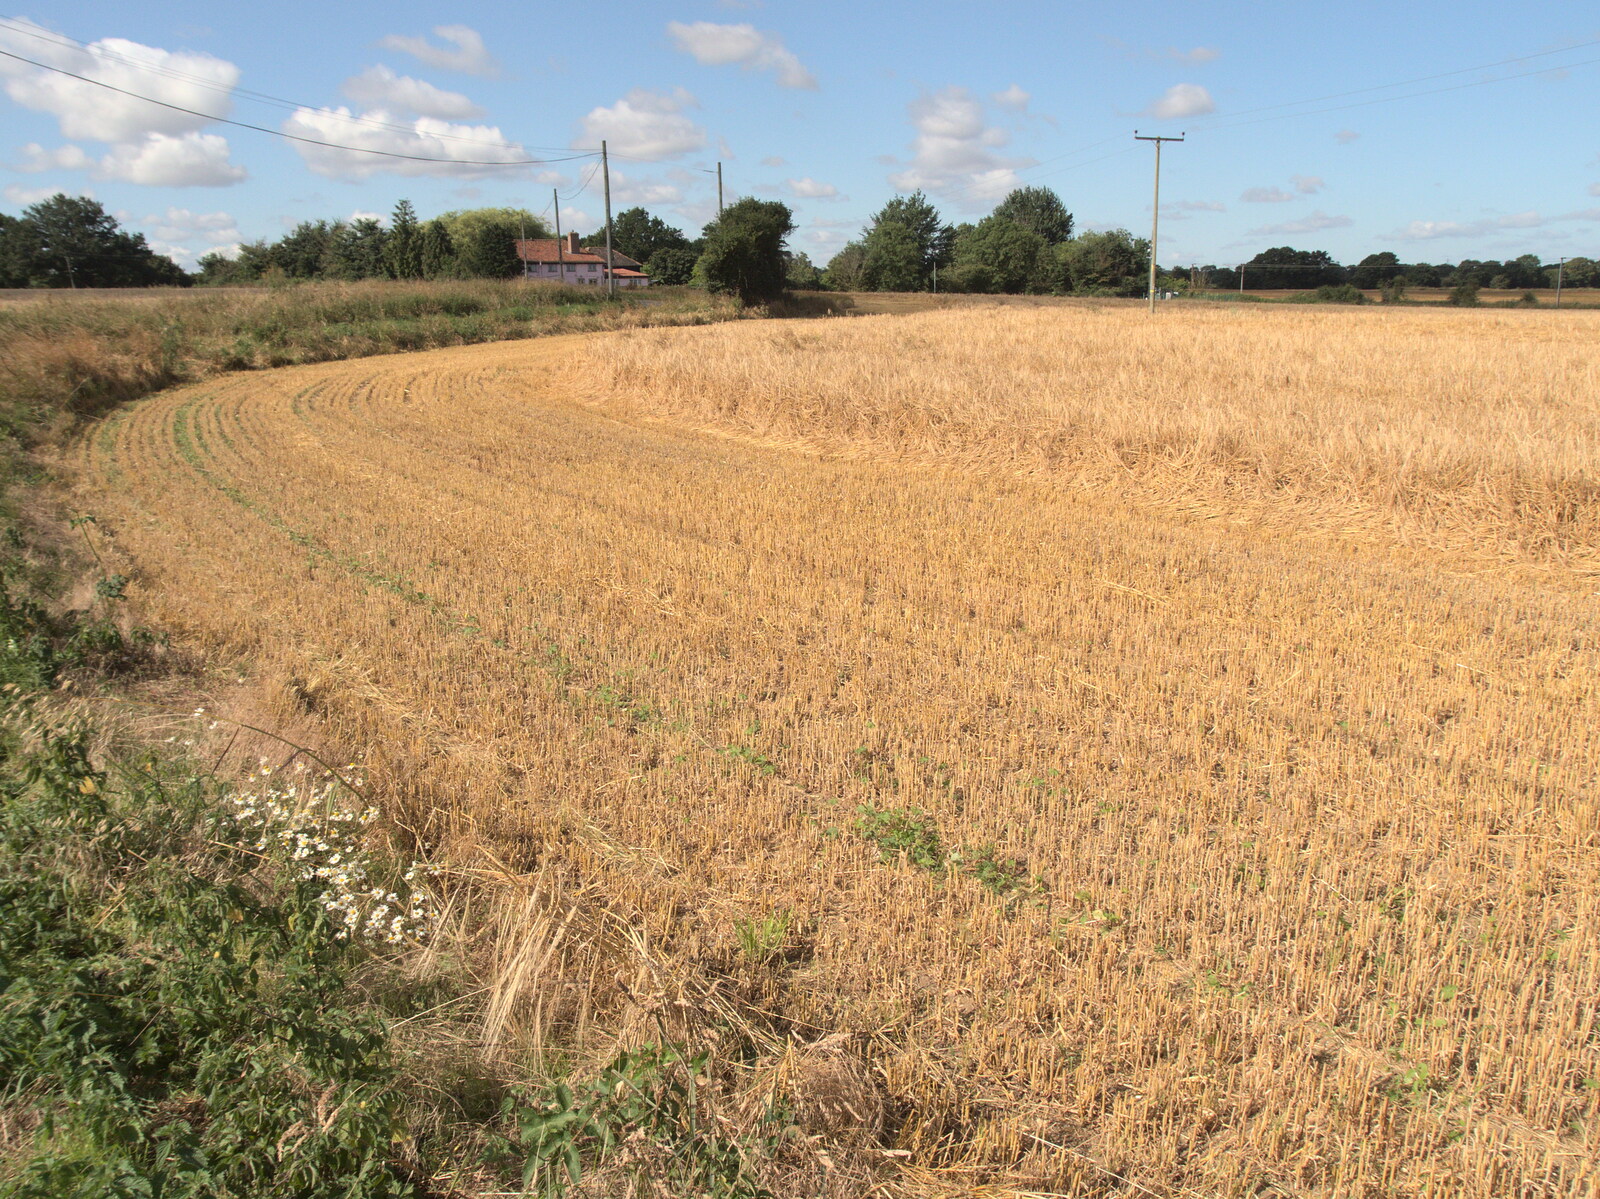 The wheat is partly-harvested over at Thrandeston from Meg-fest, and Sean Visits, Bressingham and Brome, Suffolk - 1st August 2021